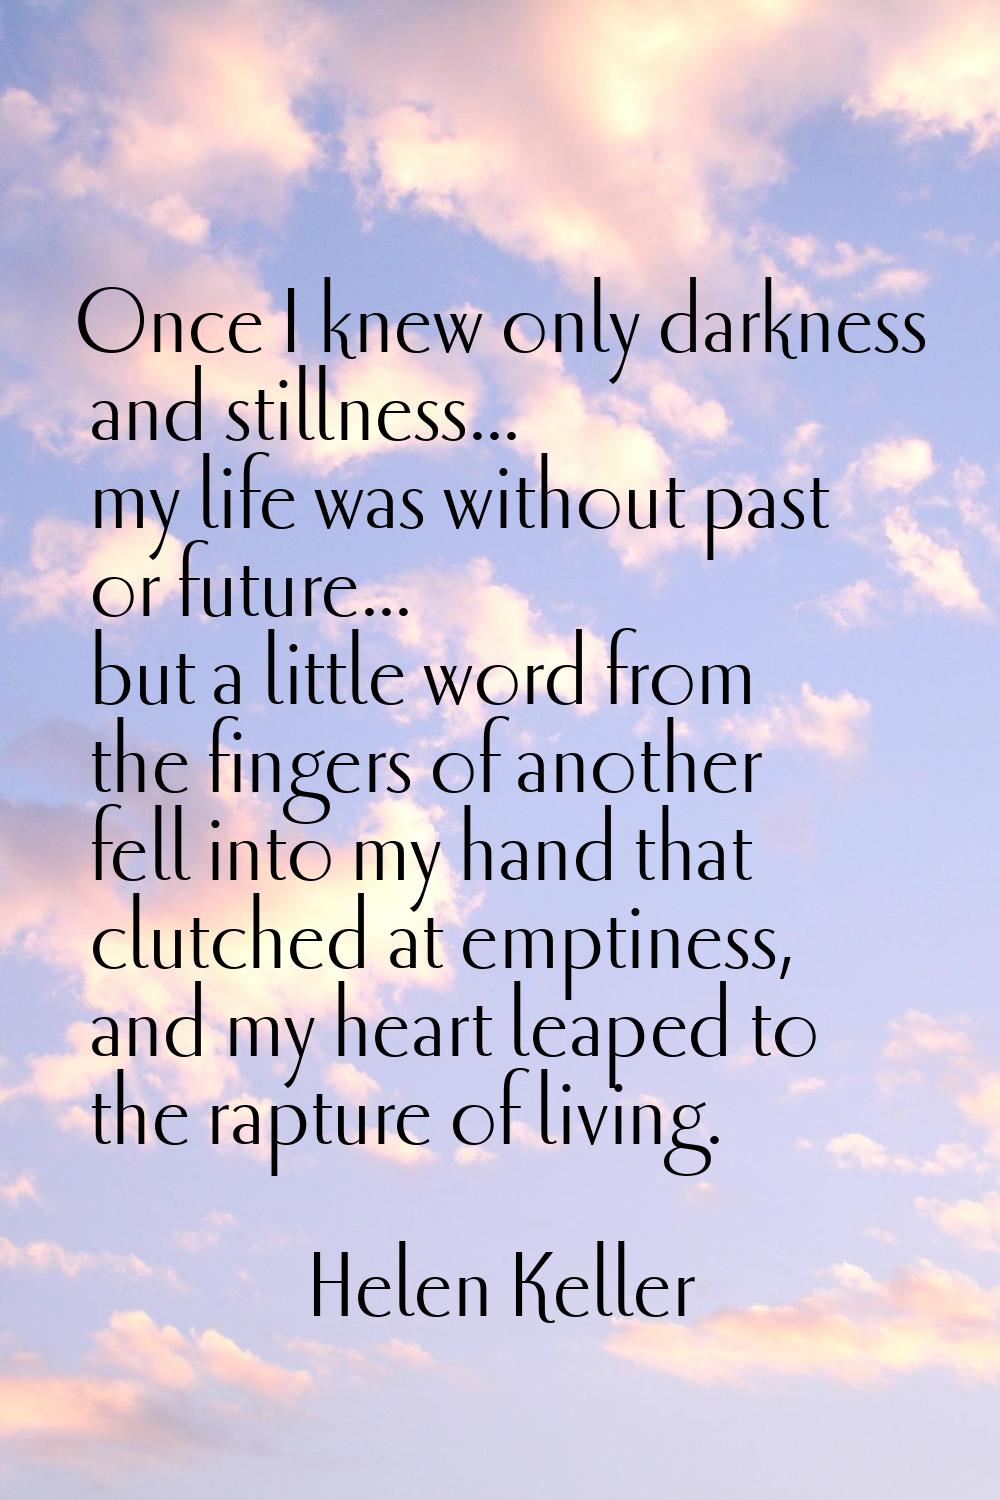 Once I knew only darkness and stillness... my life was without past or future... but a little word 